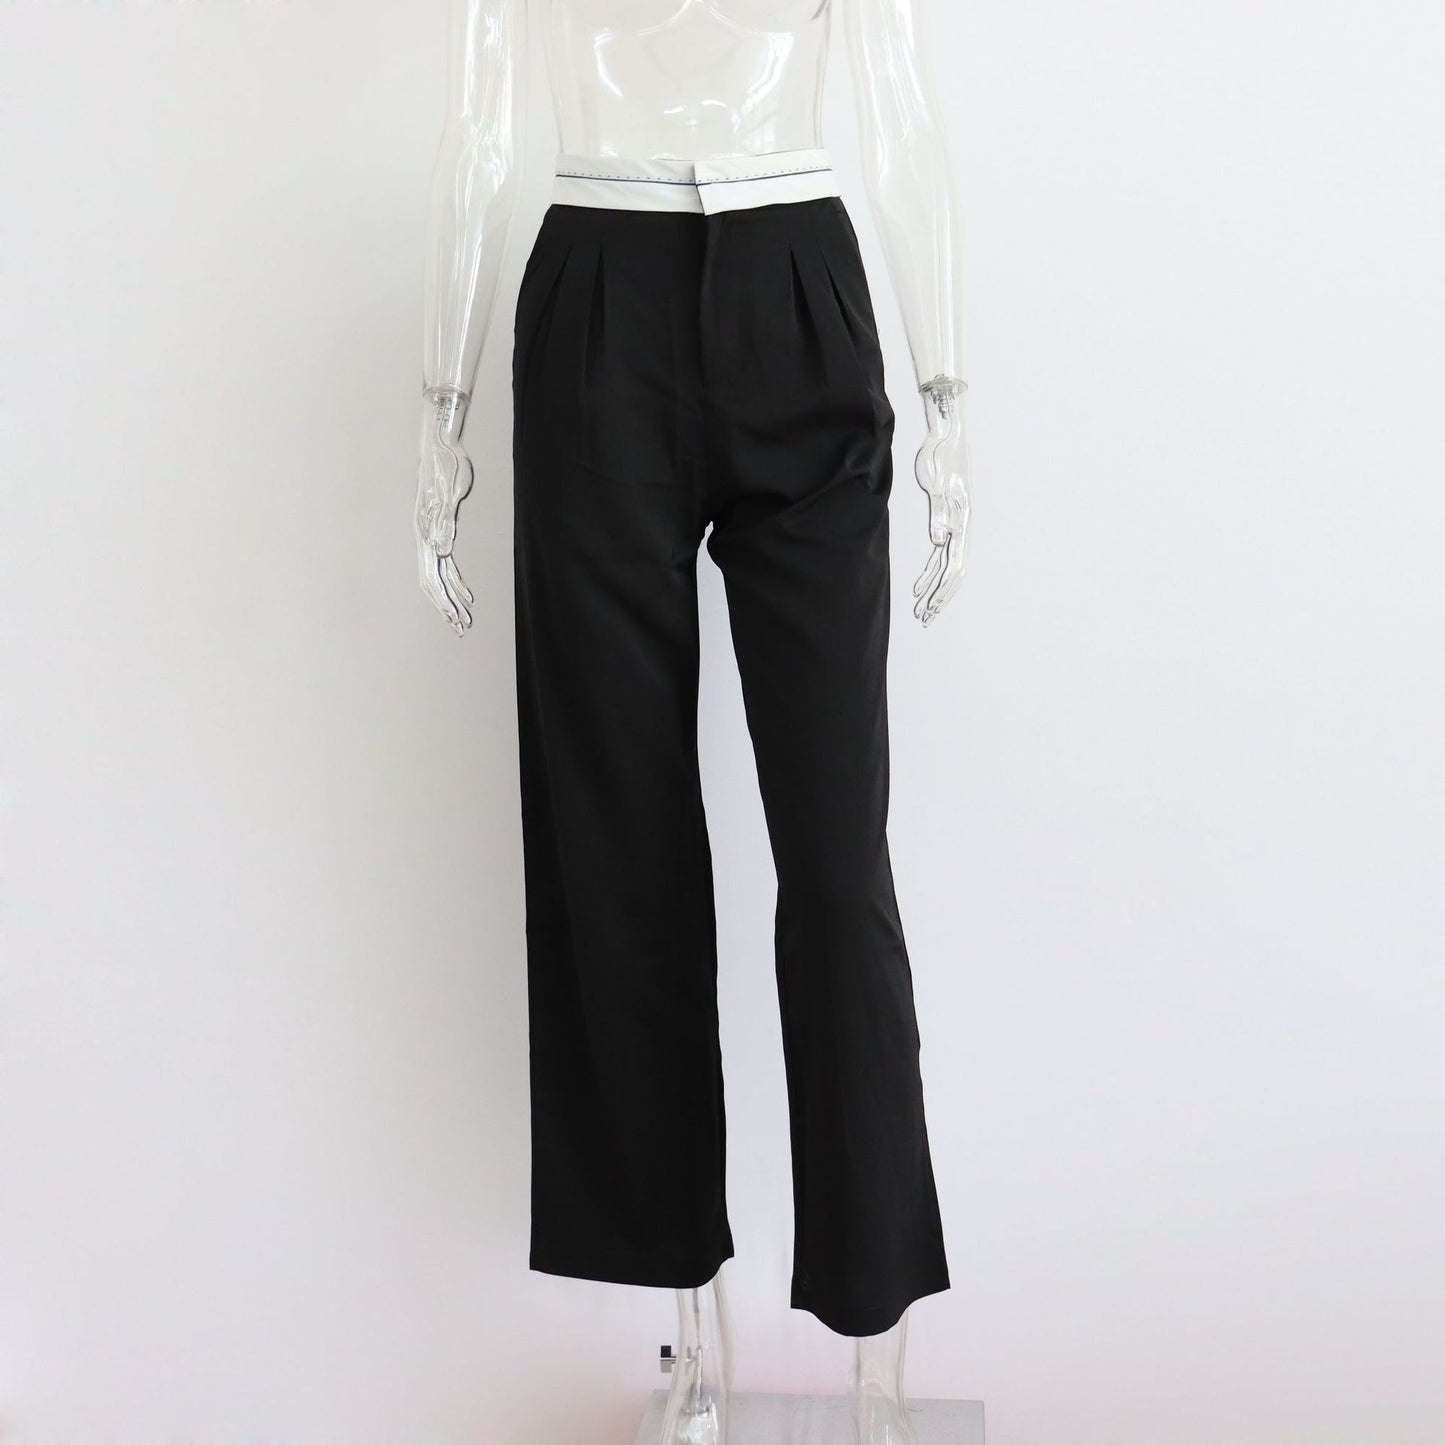 High Waist Straight Pants Casual Loose Trousers